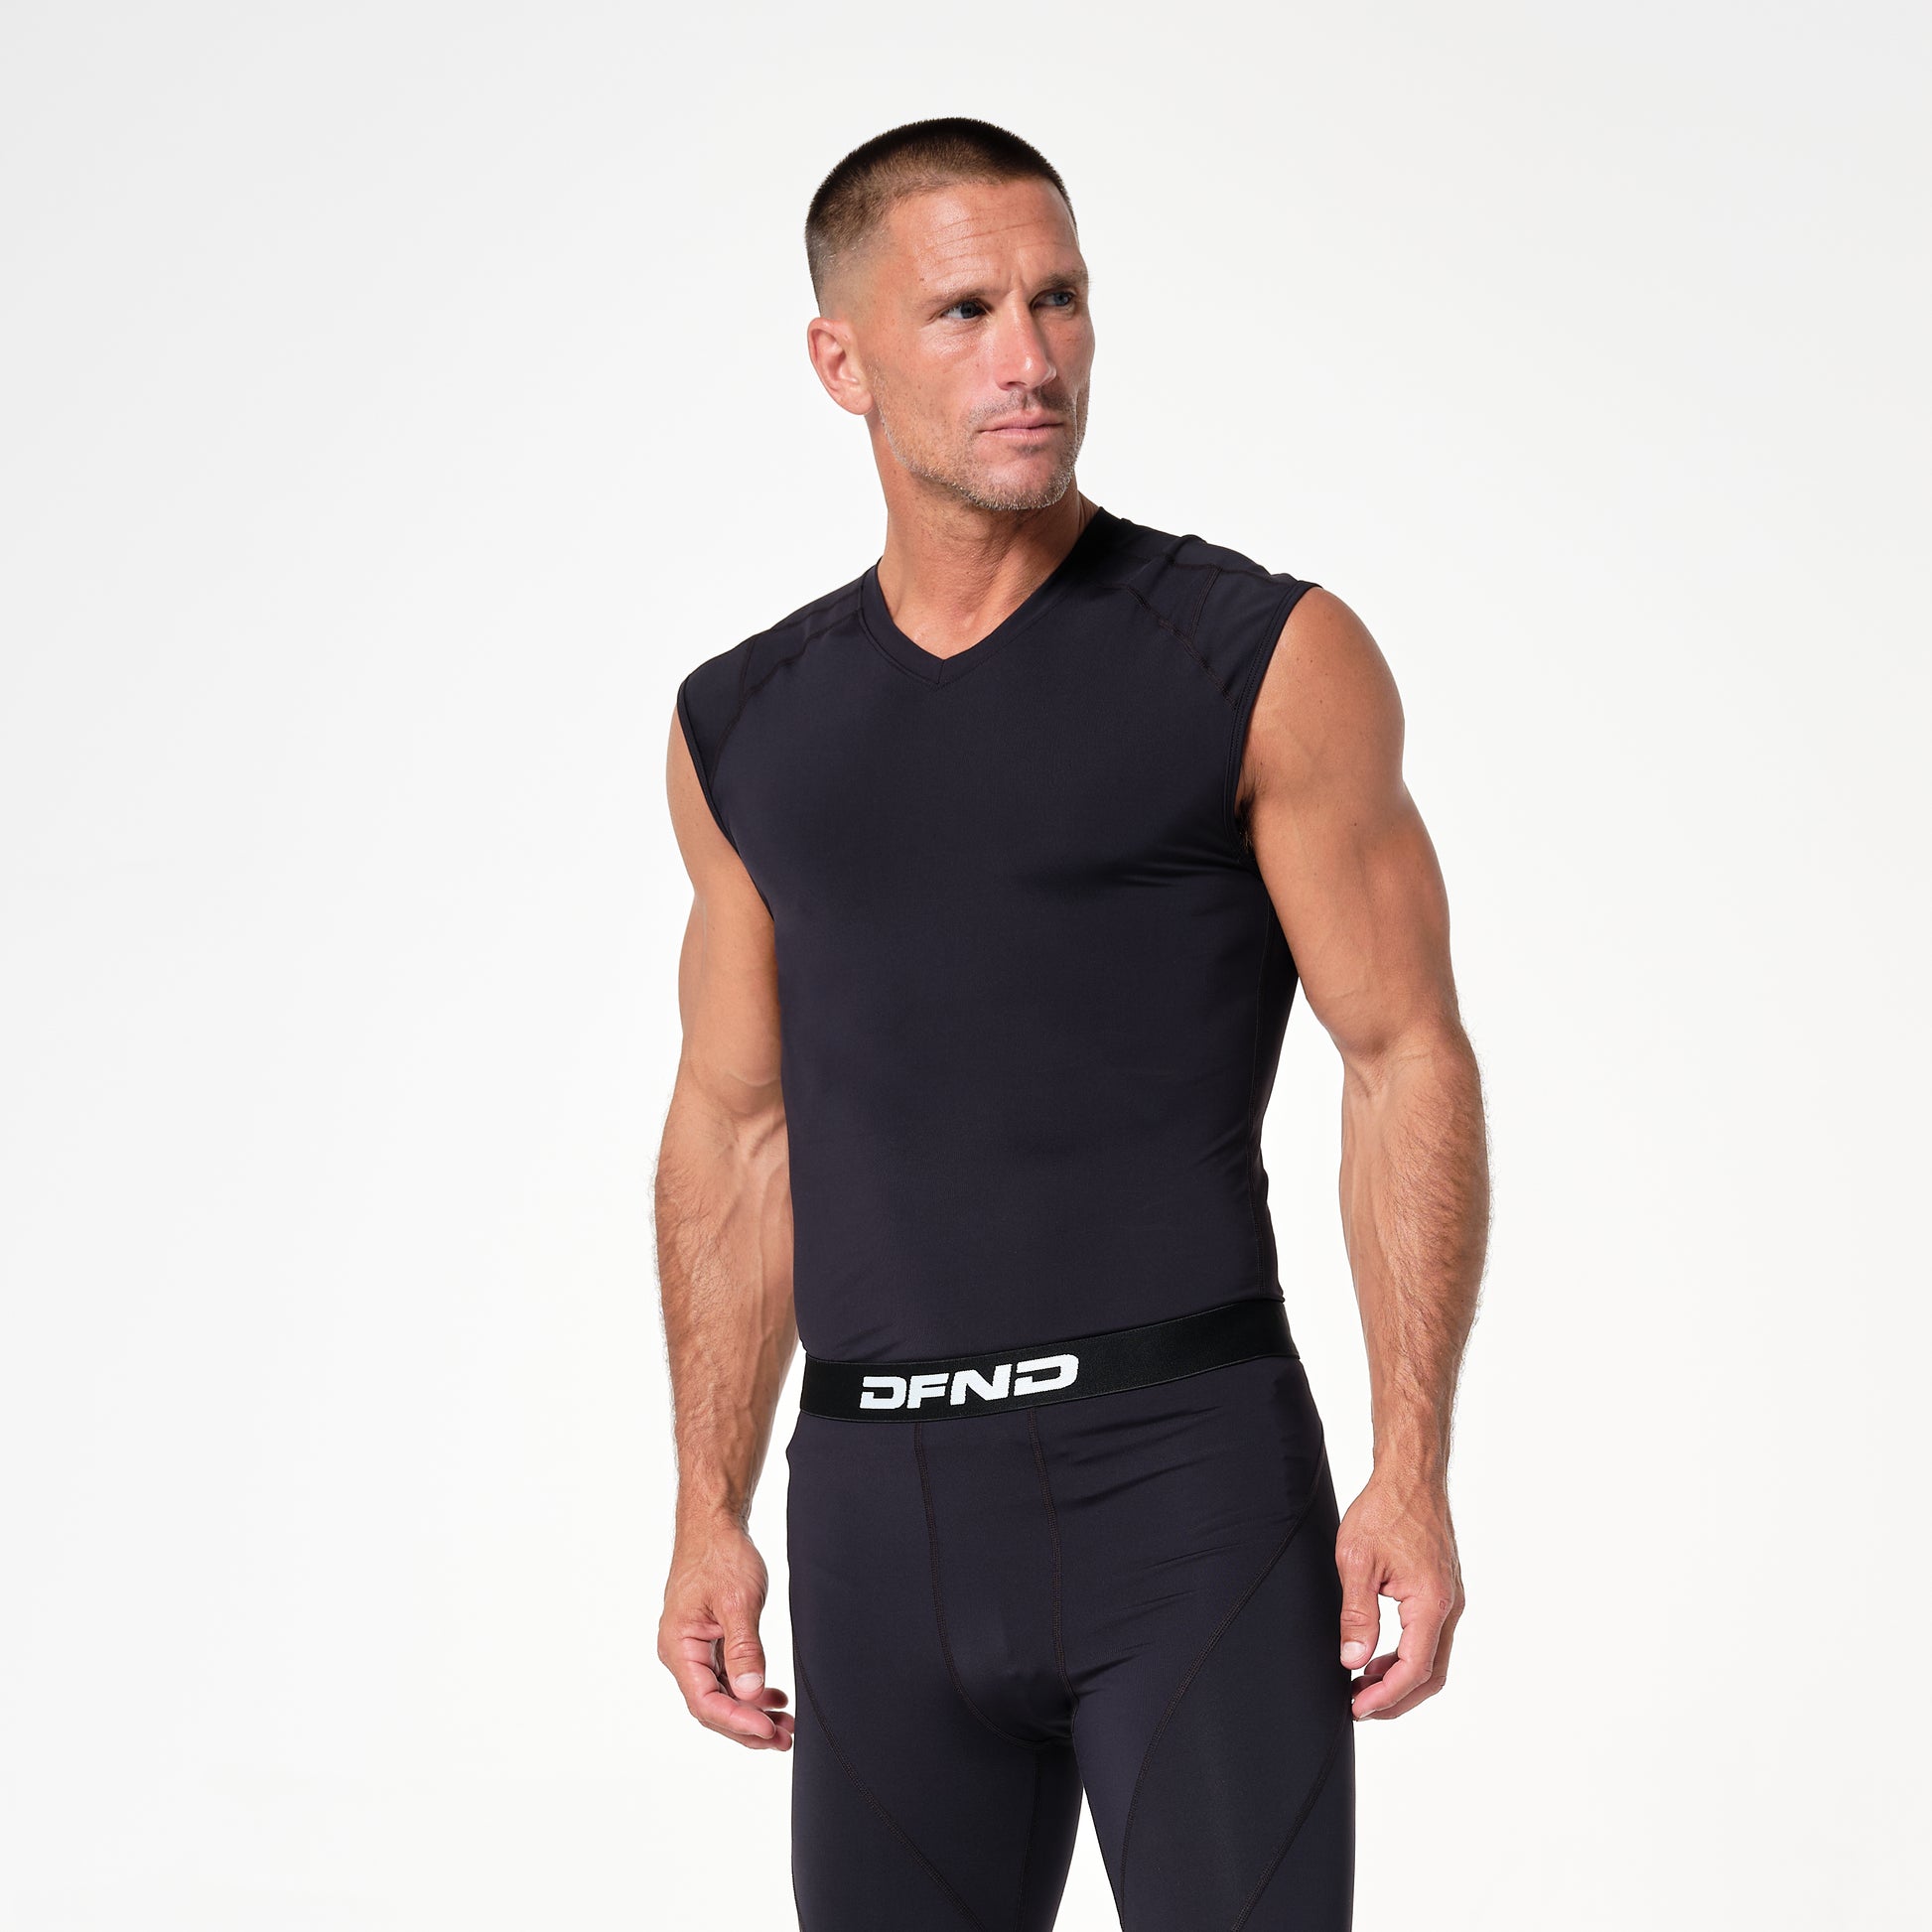 Muscle hunk in Under Armour compression shirt